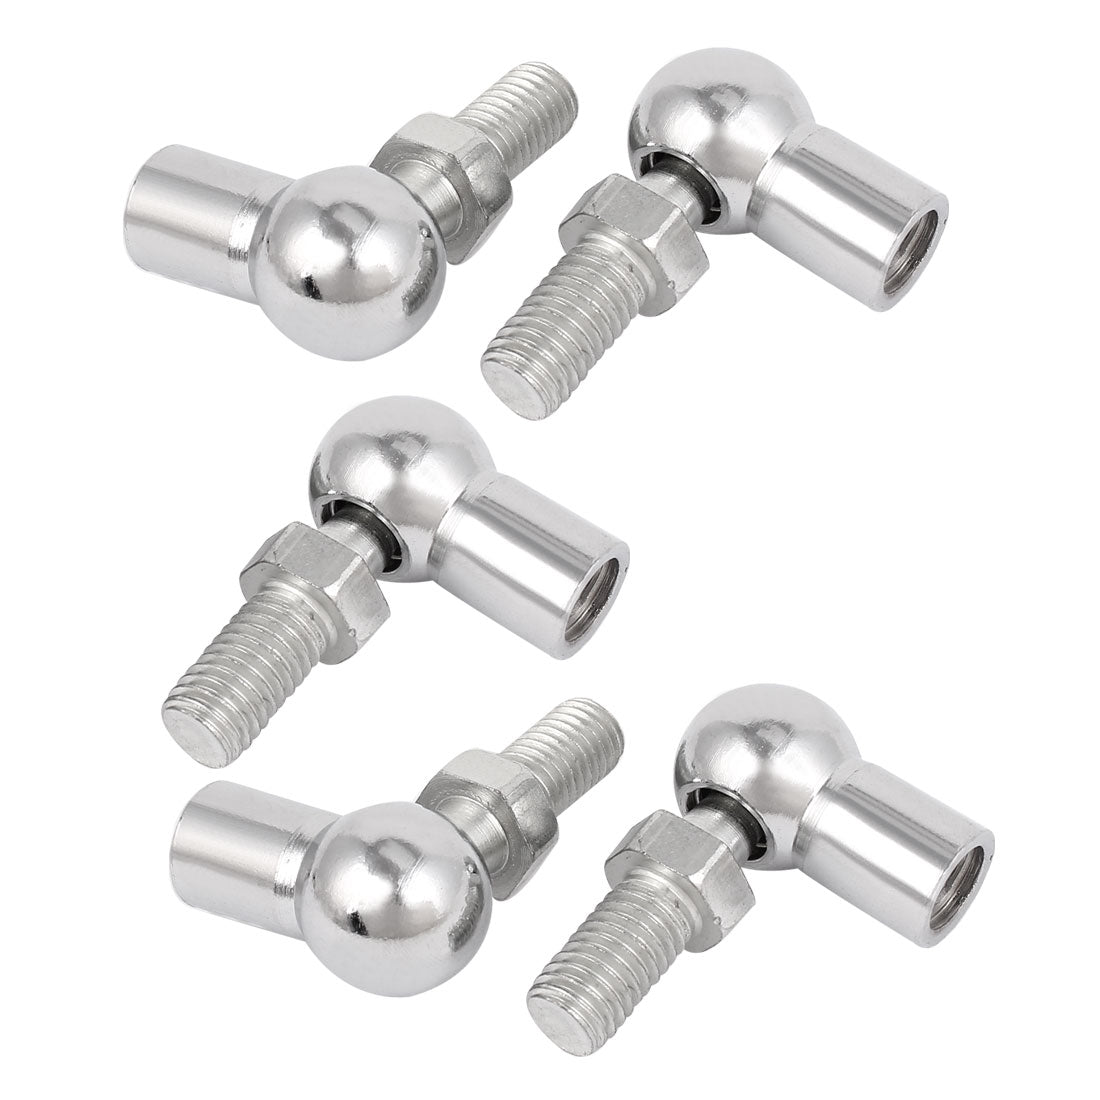 uxcell Uxcell 10mm Male Female Thread L Shape Ball Joint Rod End Bearing 5 Pcs